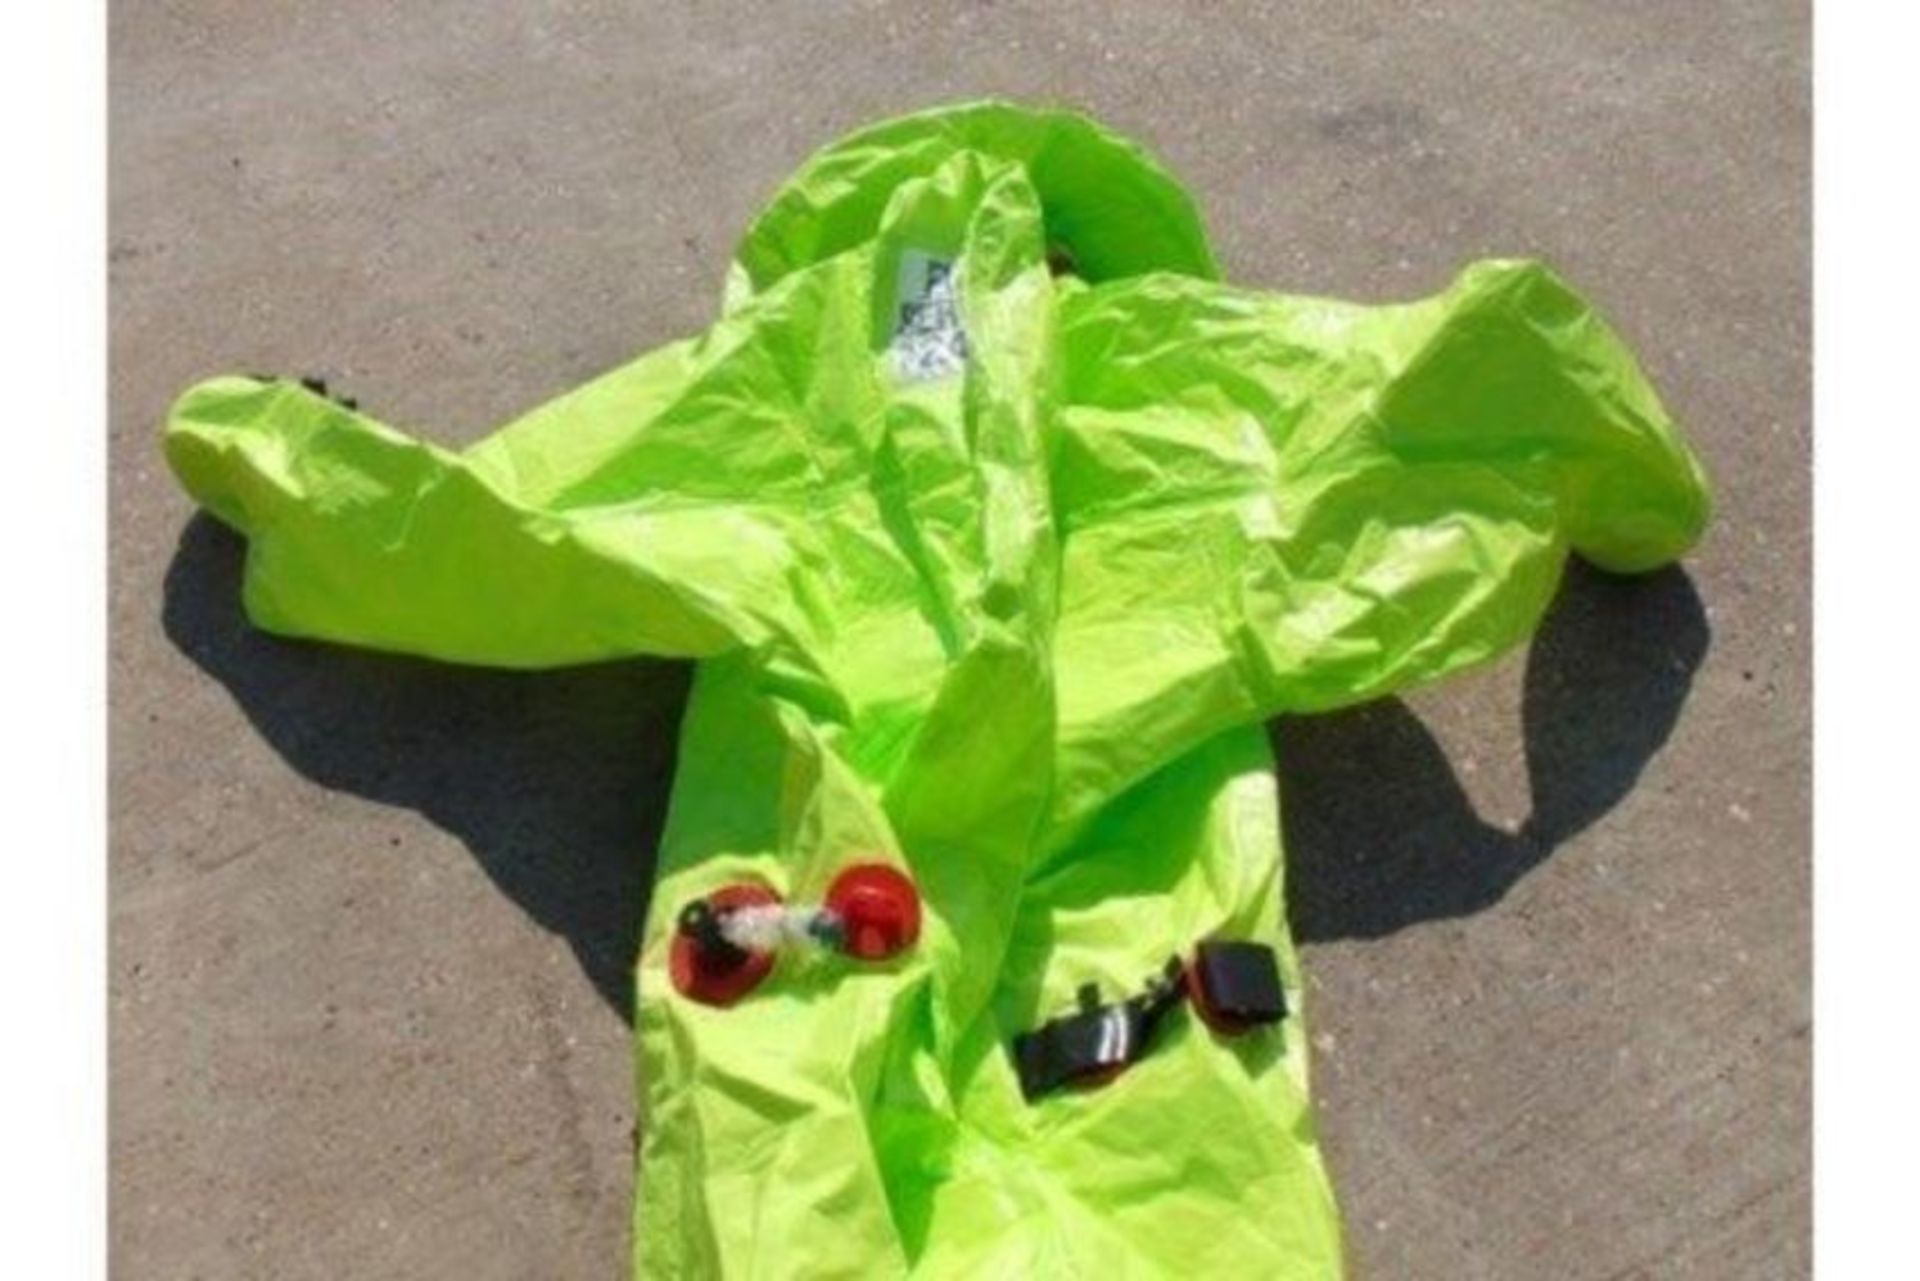 10 x Respirex Tychem TK Gas-Tight Hazmat Suit Type 1A with Attached Boots and Gloves - Image 7 of 9